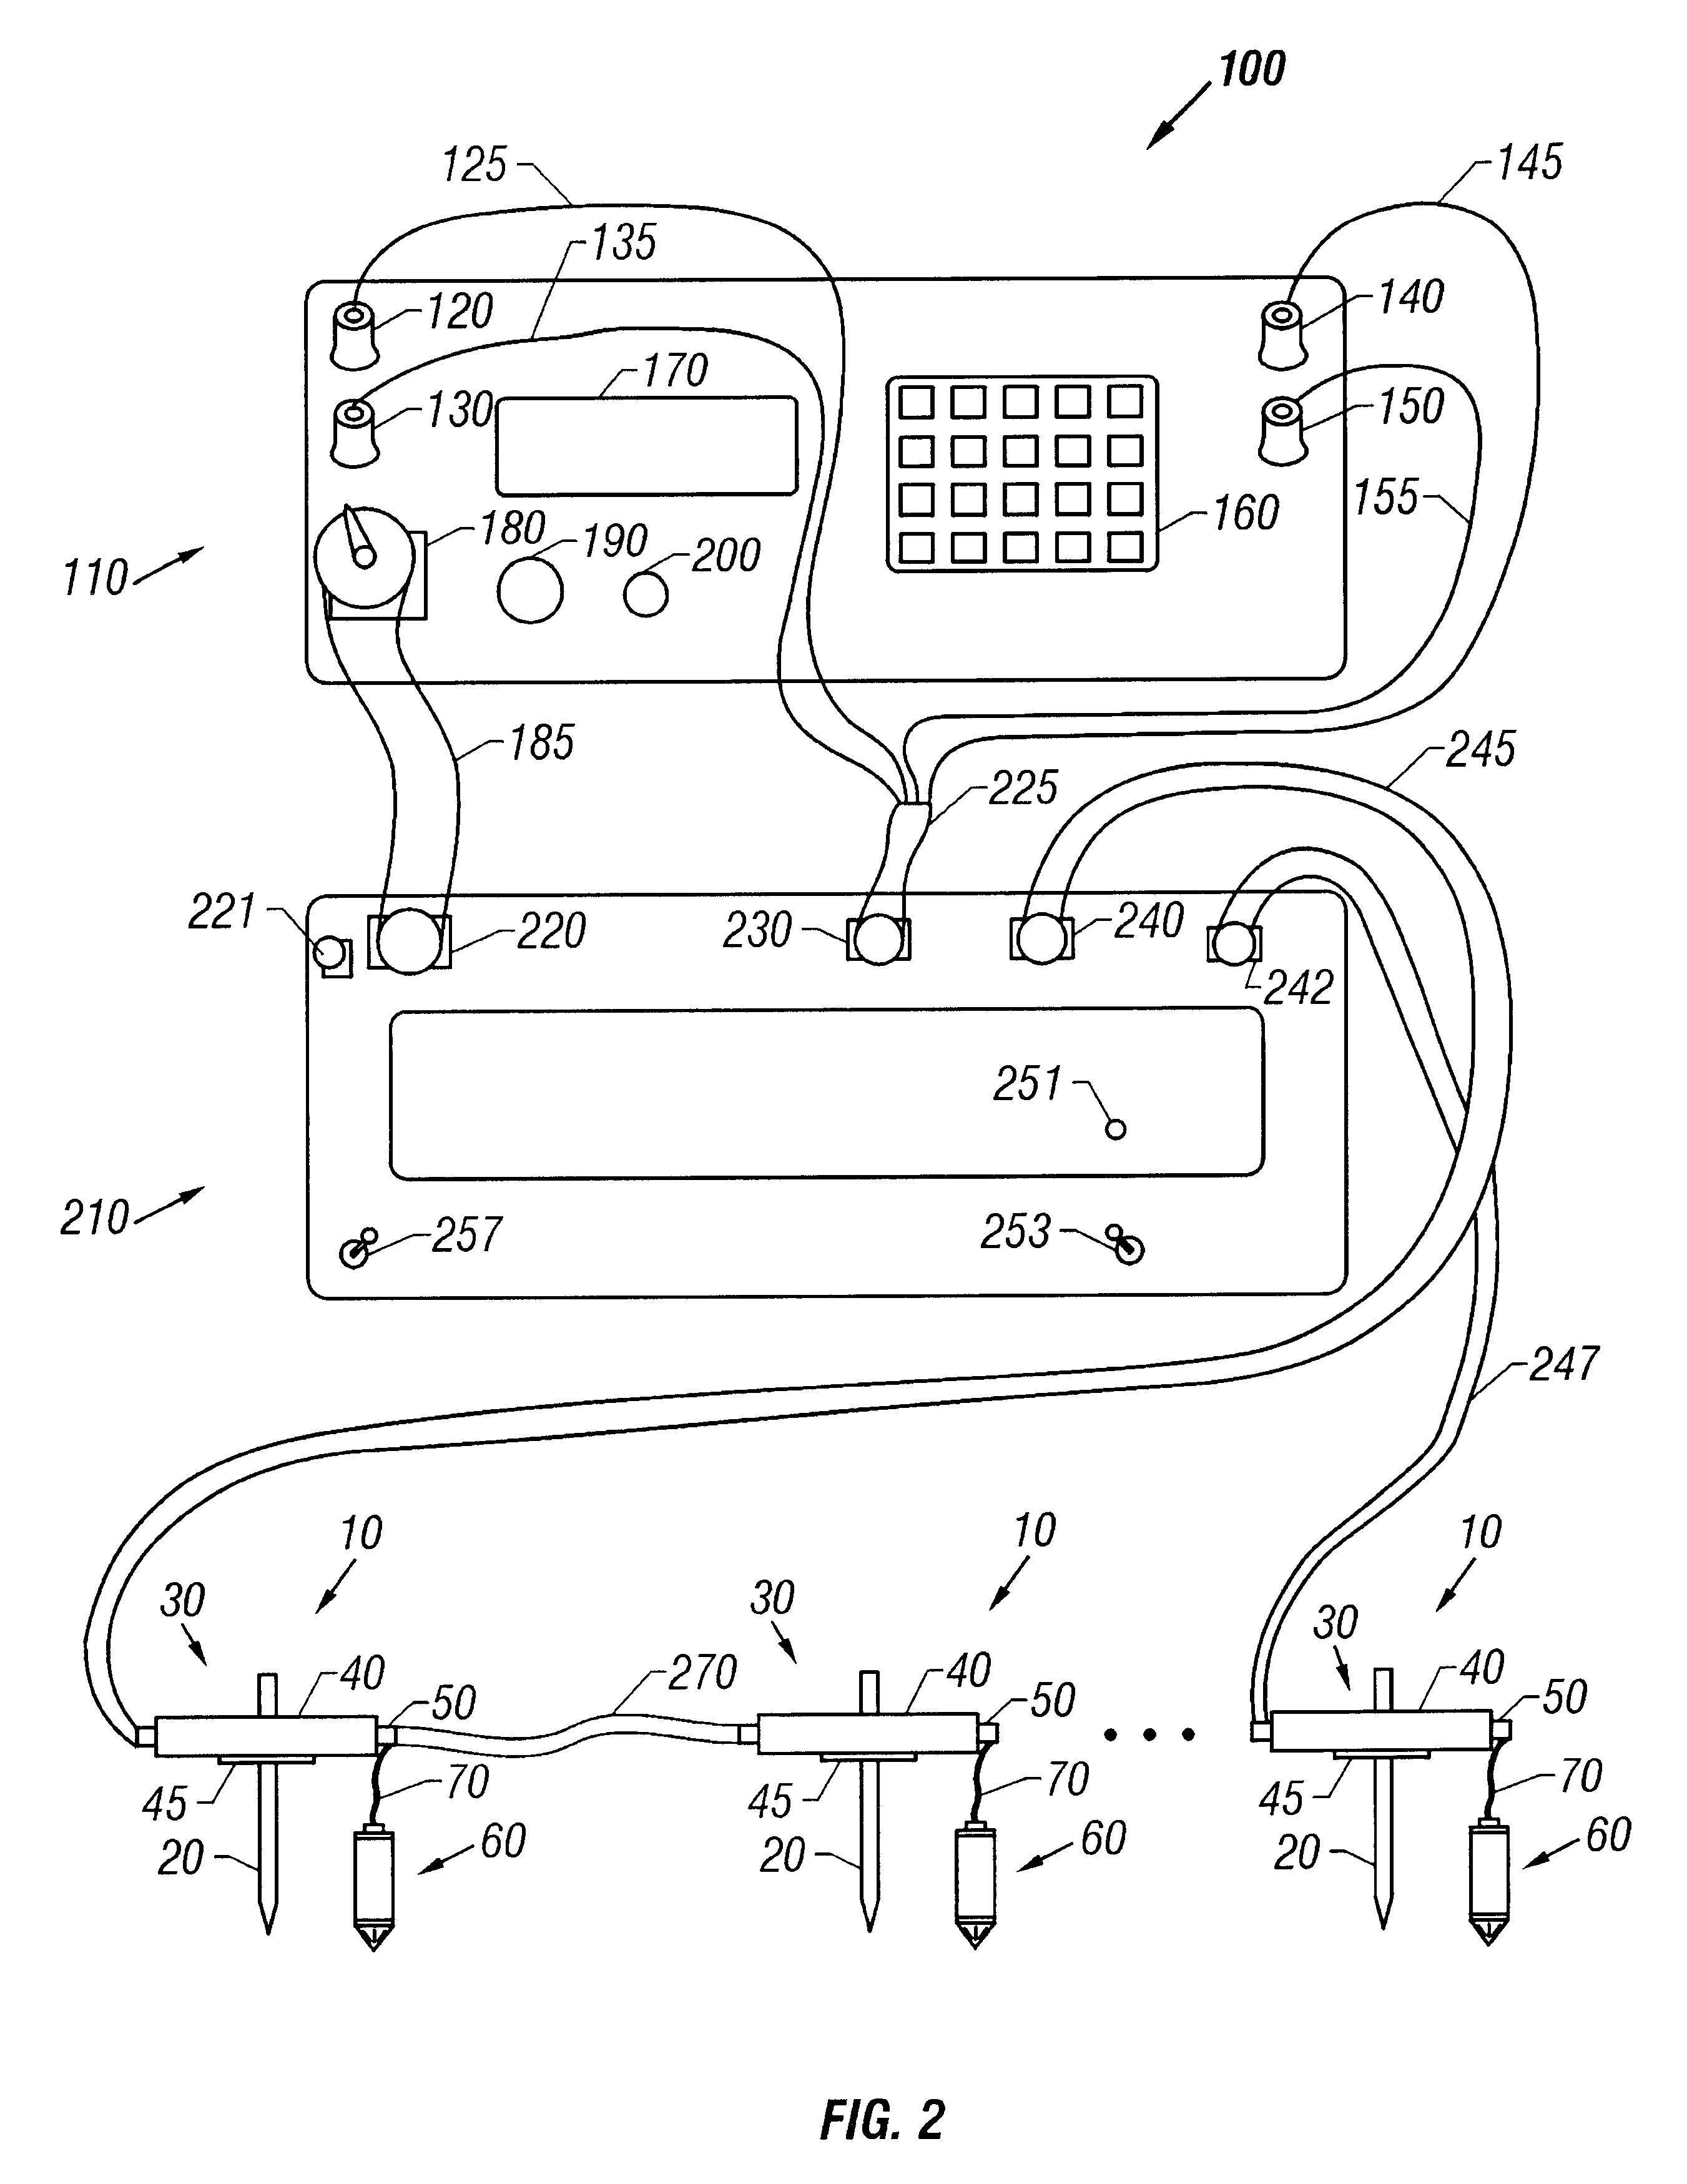 Methods and apparatus for measuring electrical properties of a ground using an electrode configurable as a transmitter or receiver